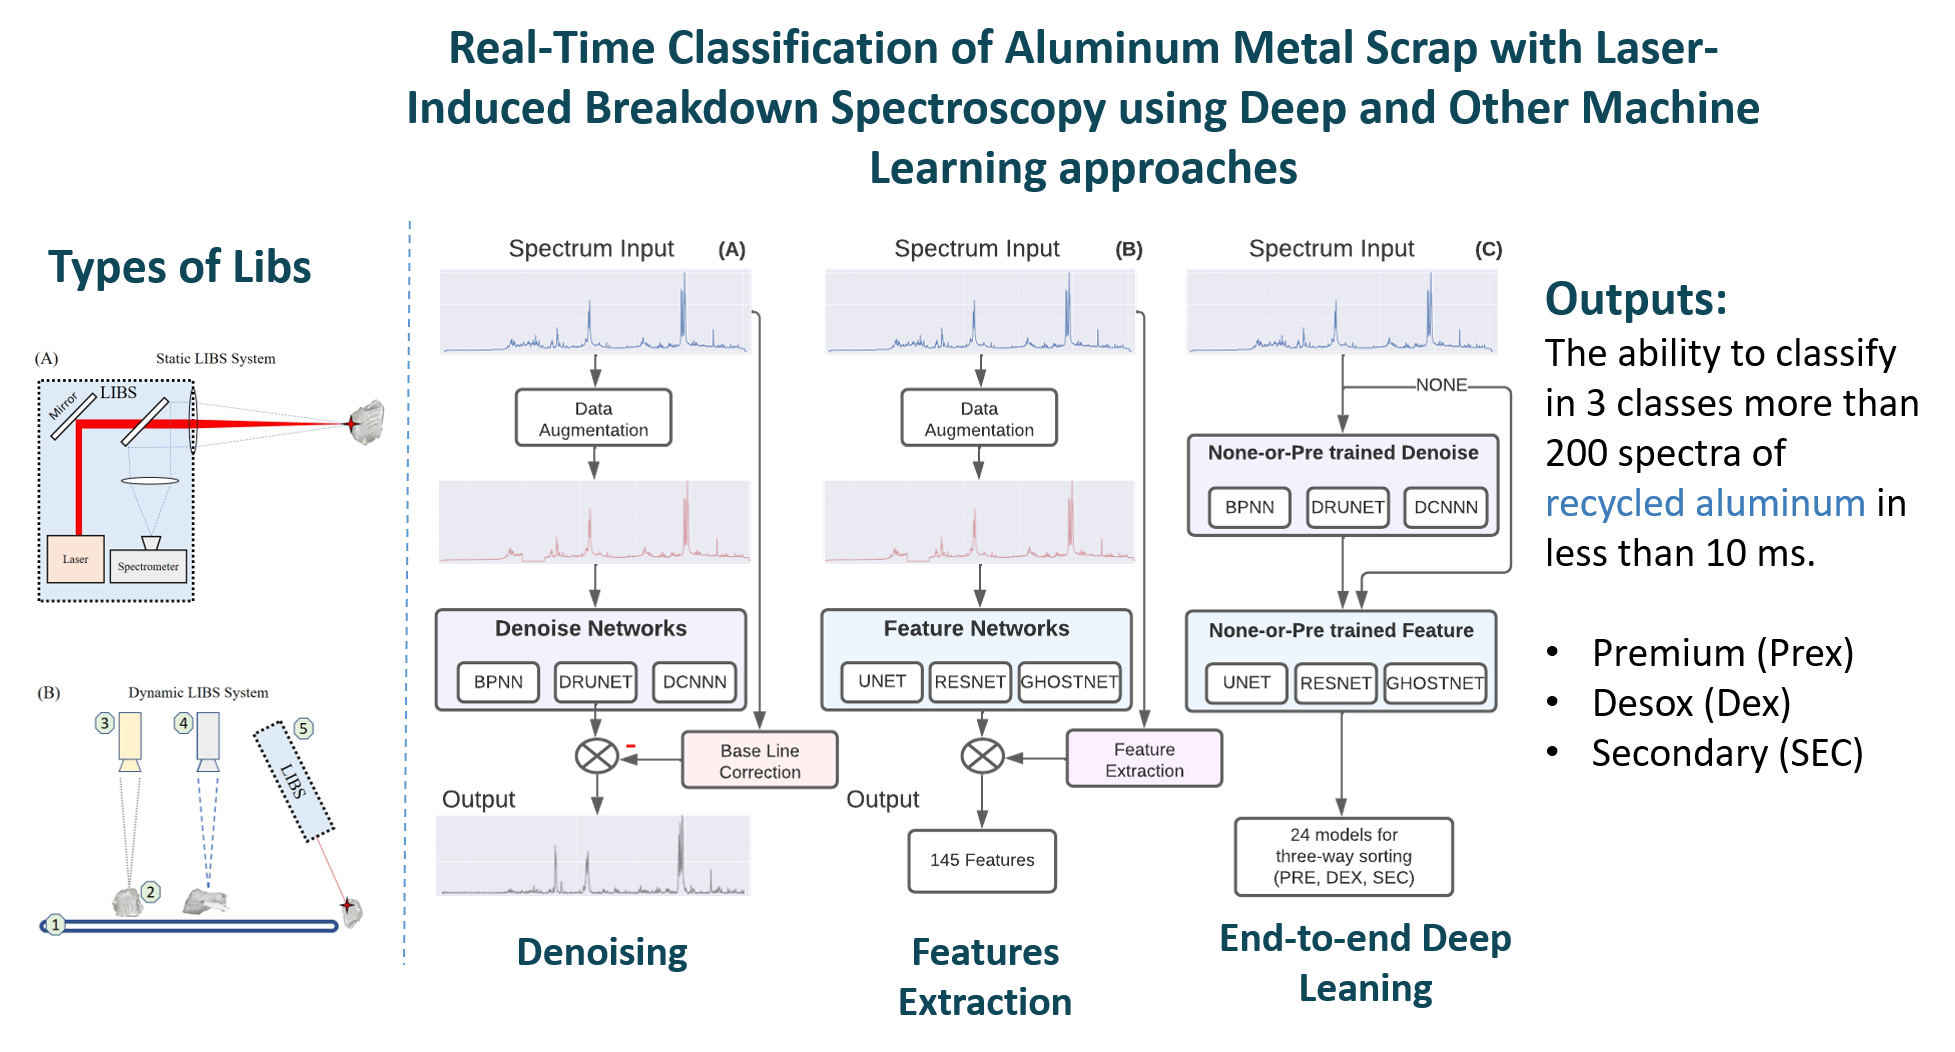 Our new article is out: Real-time classification of aluminum metal scrap with laser-induced breakdown spectroscopy using deep and other machine learning approaches.